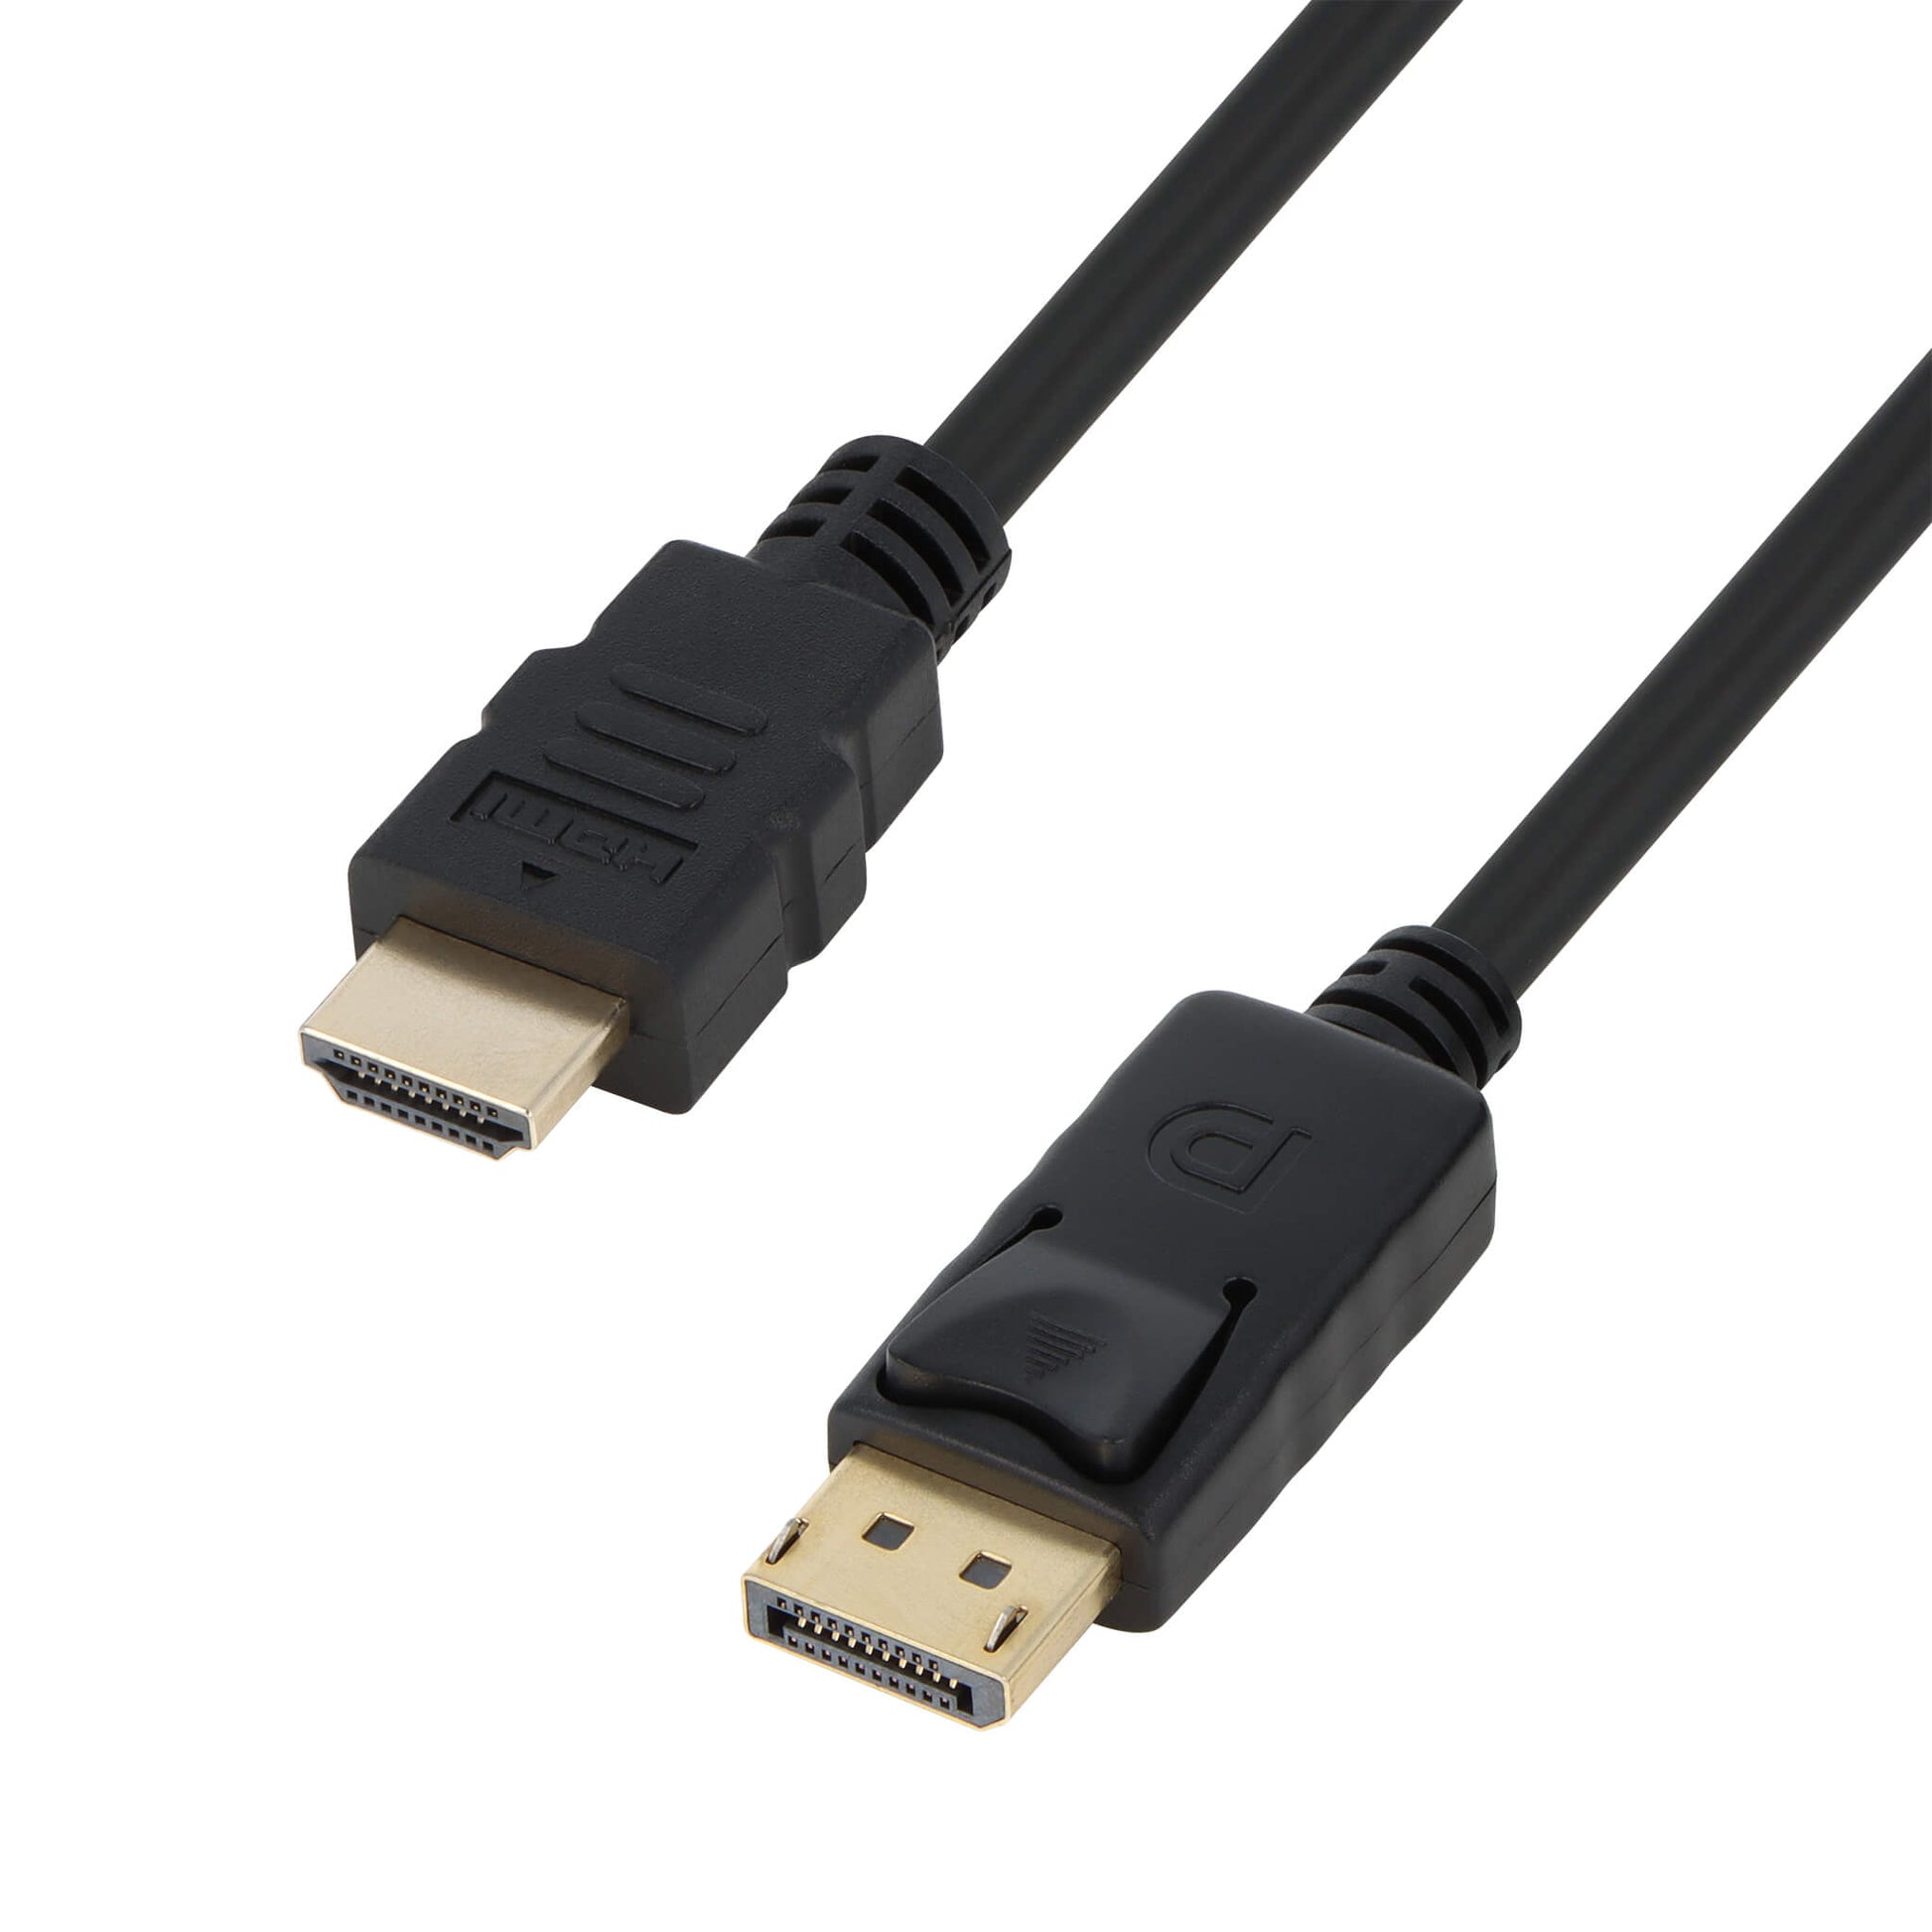 HDMI to DisplayPort Cable - HDMI to DP Adapter - Active Cable  (Male-to-Male) - 4K Compatible - 1.5M/5 ft - VisionTek